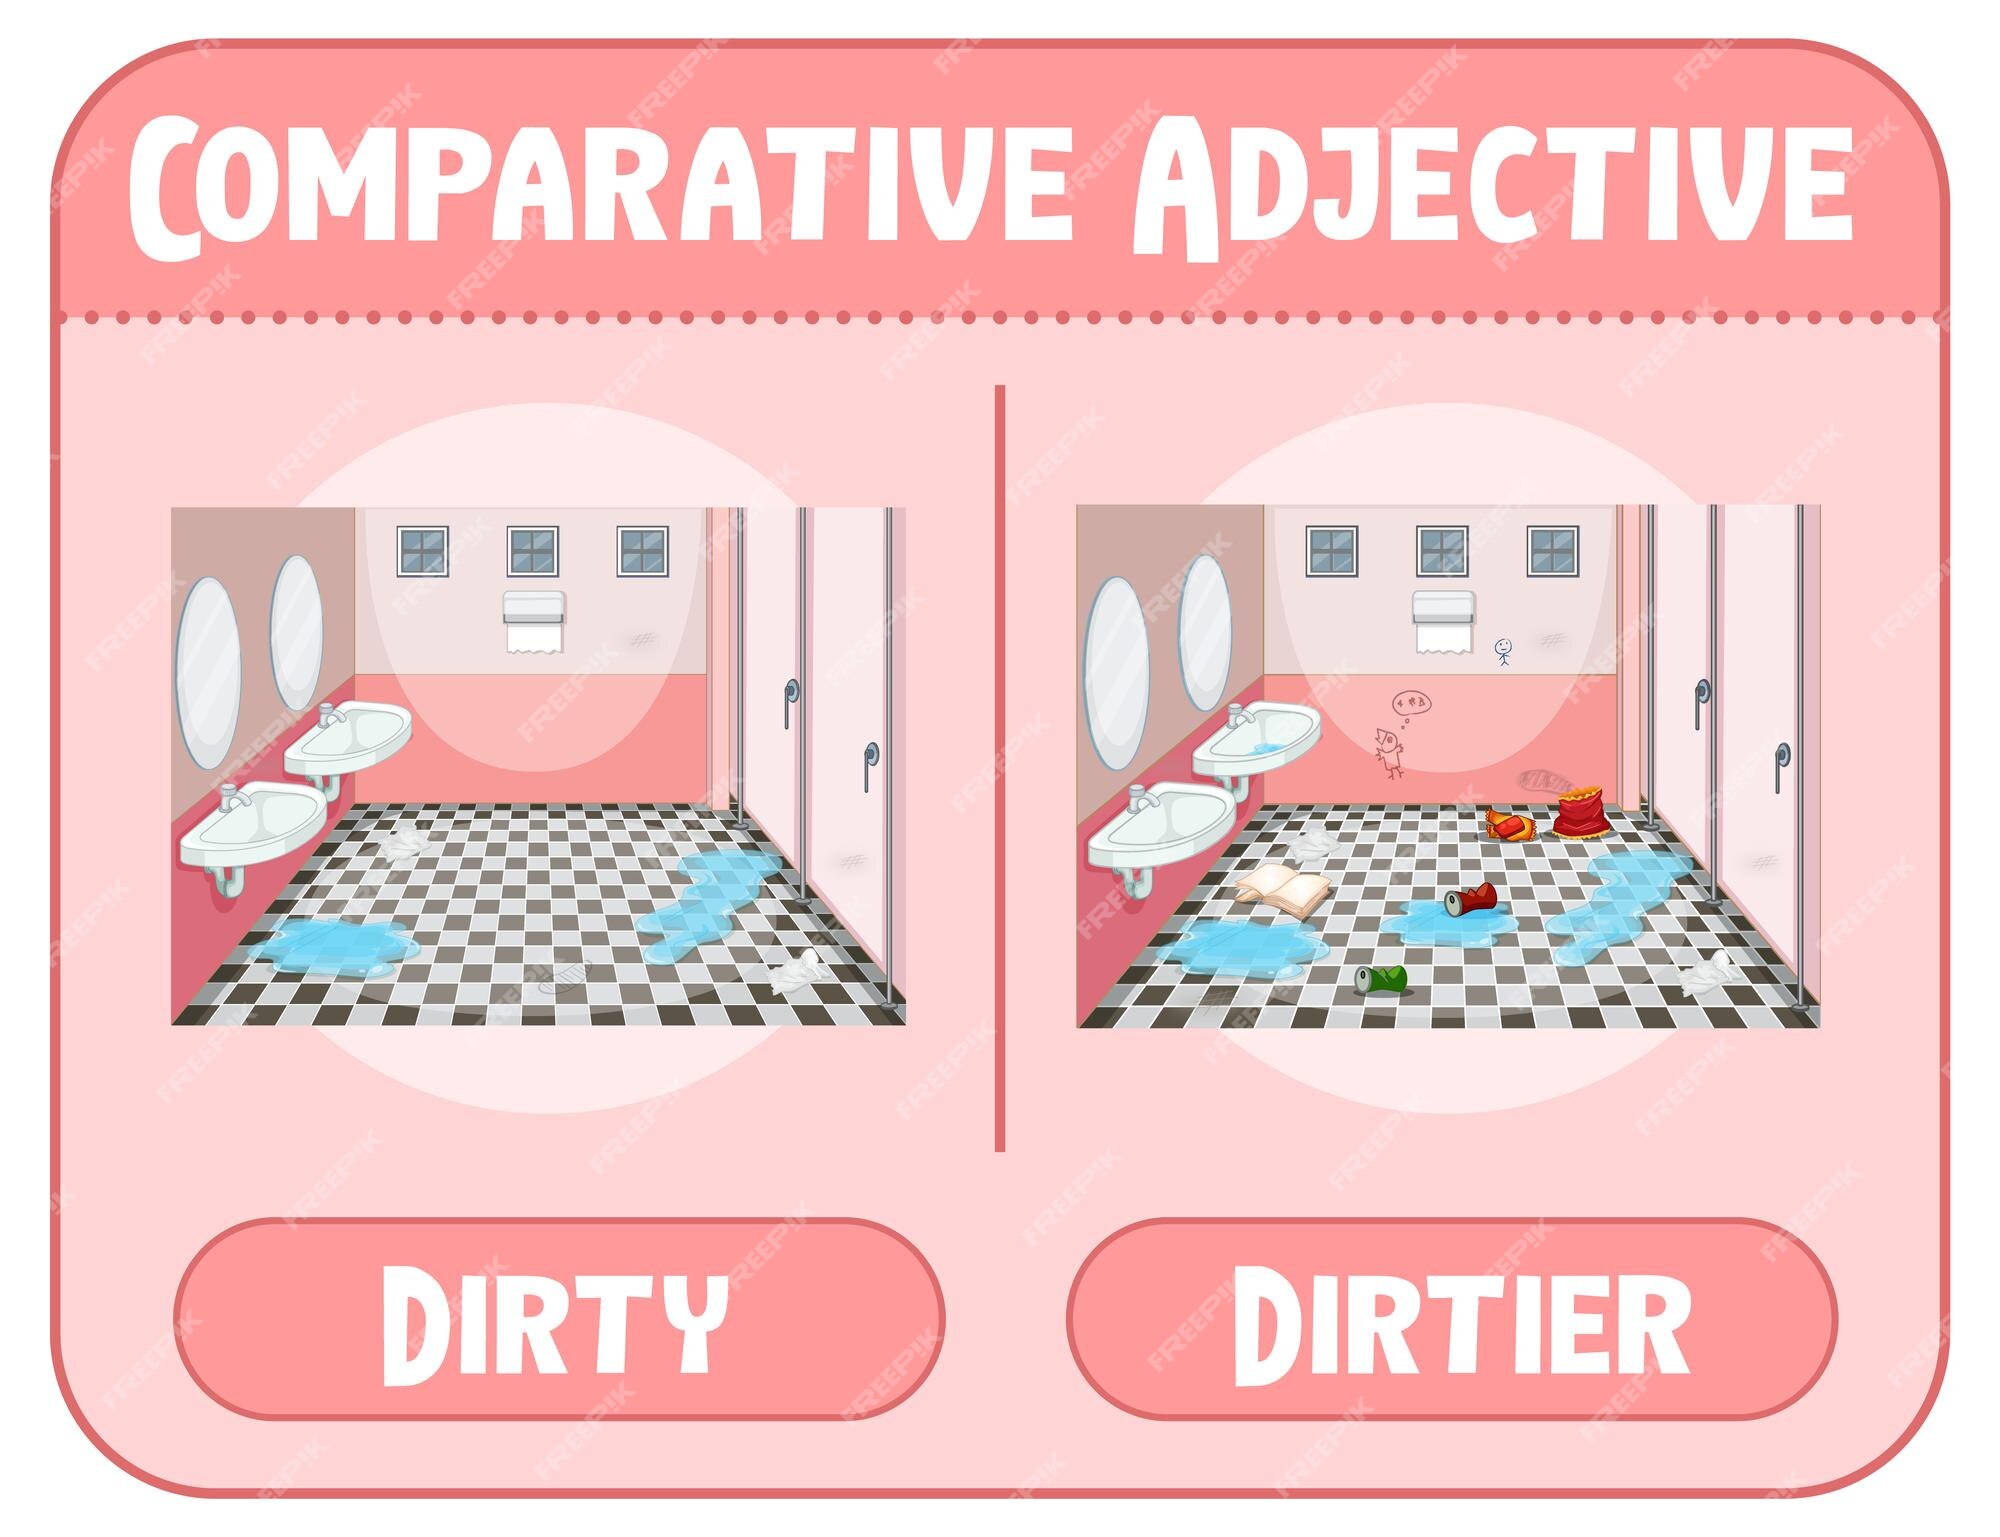 Dirty adjectives